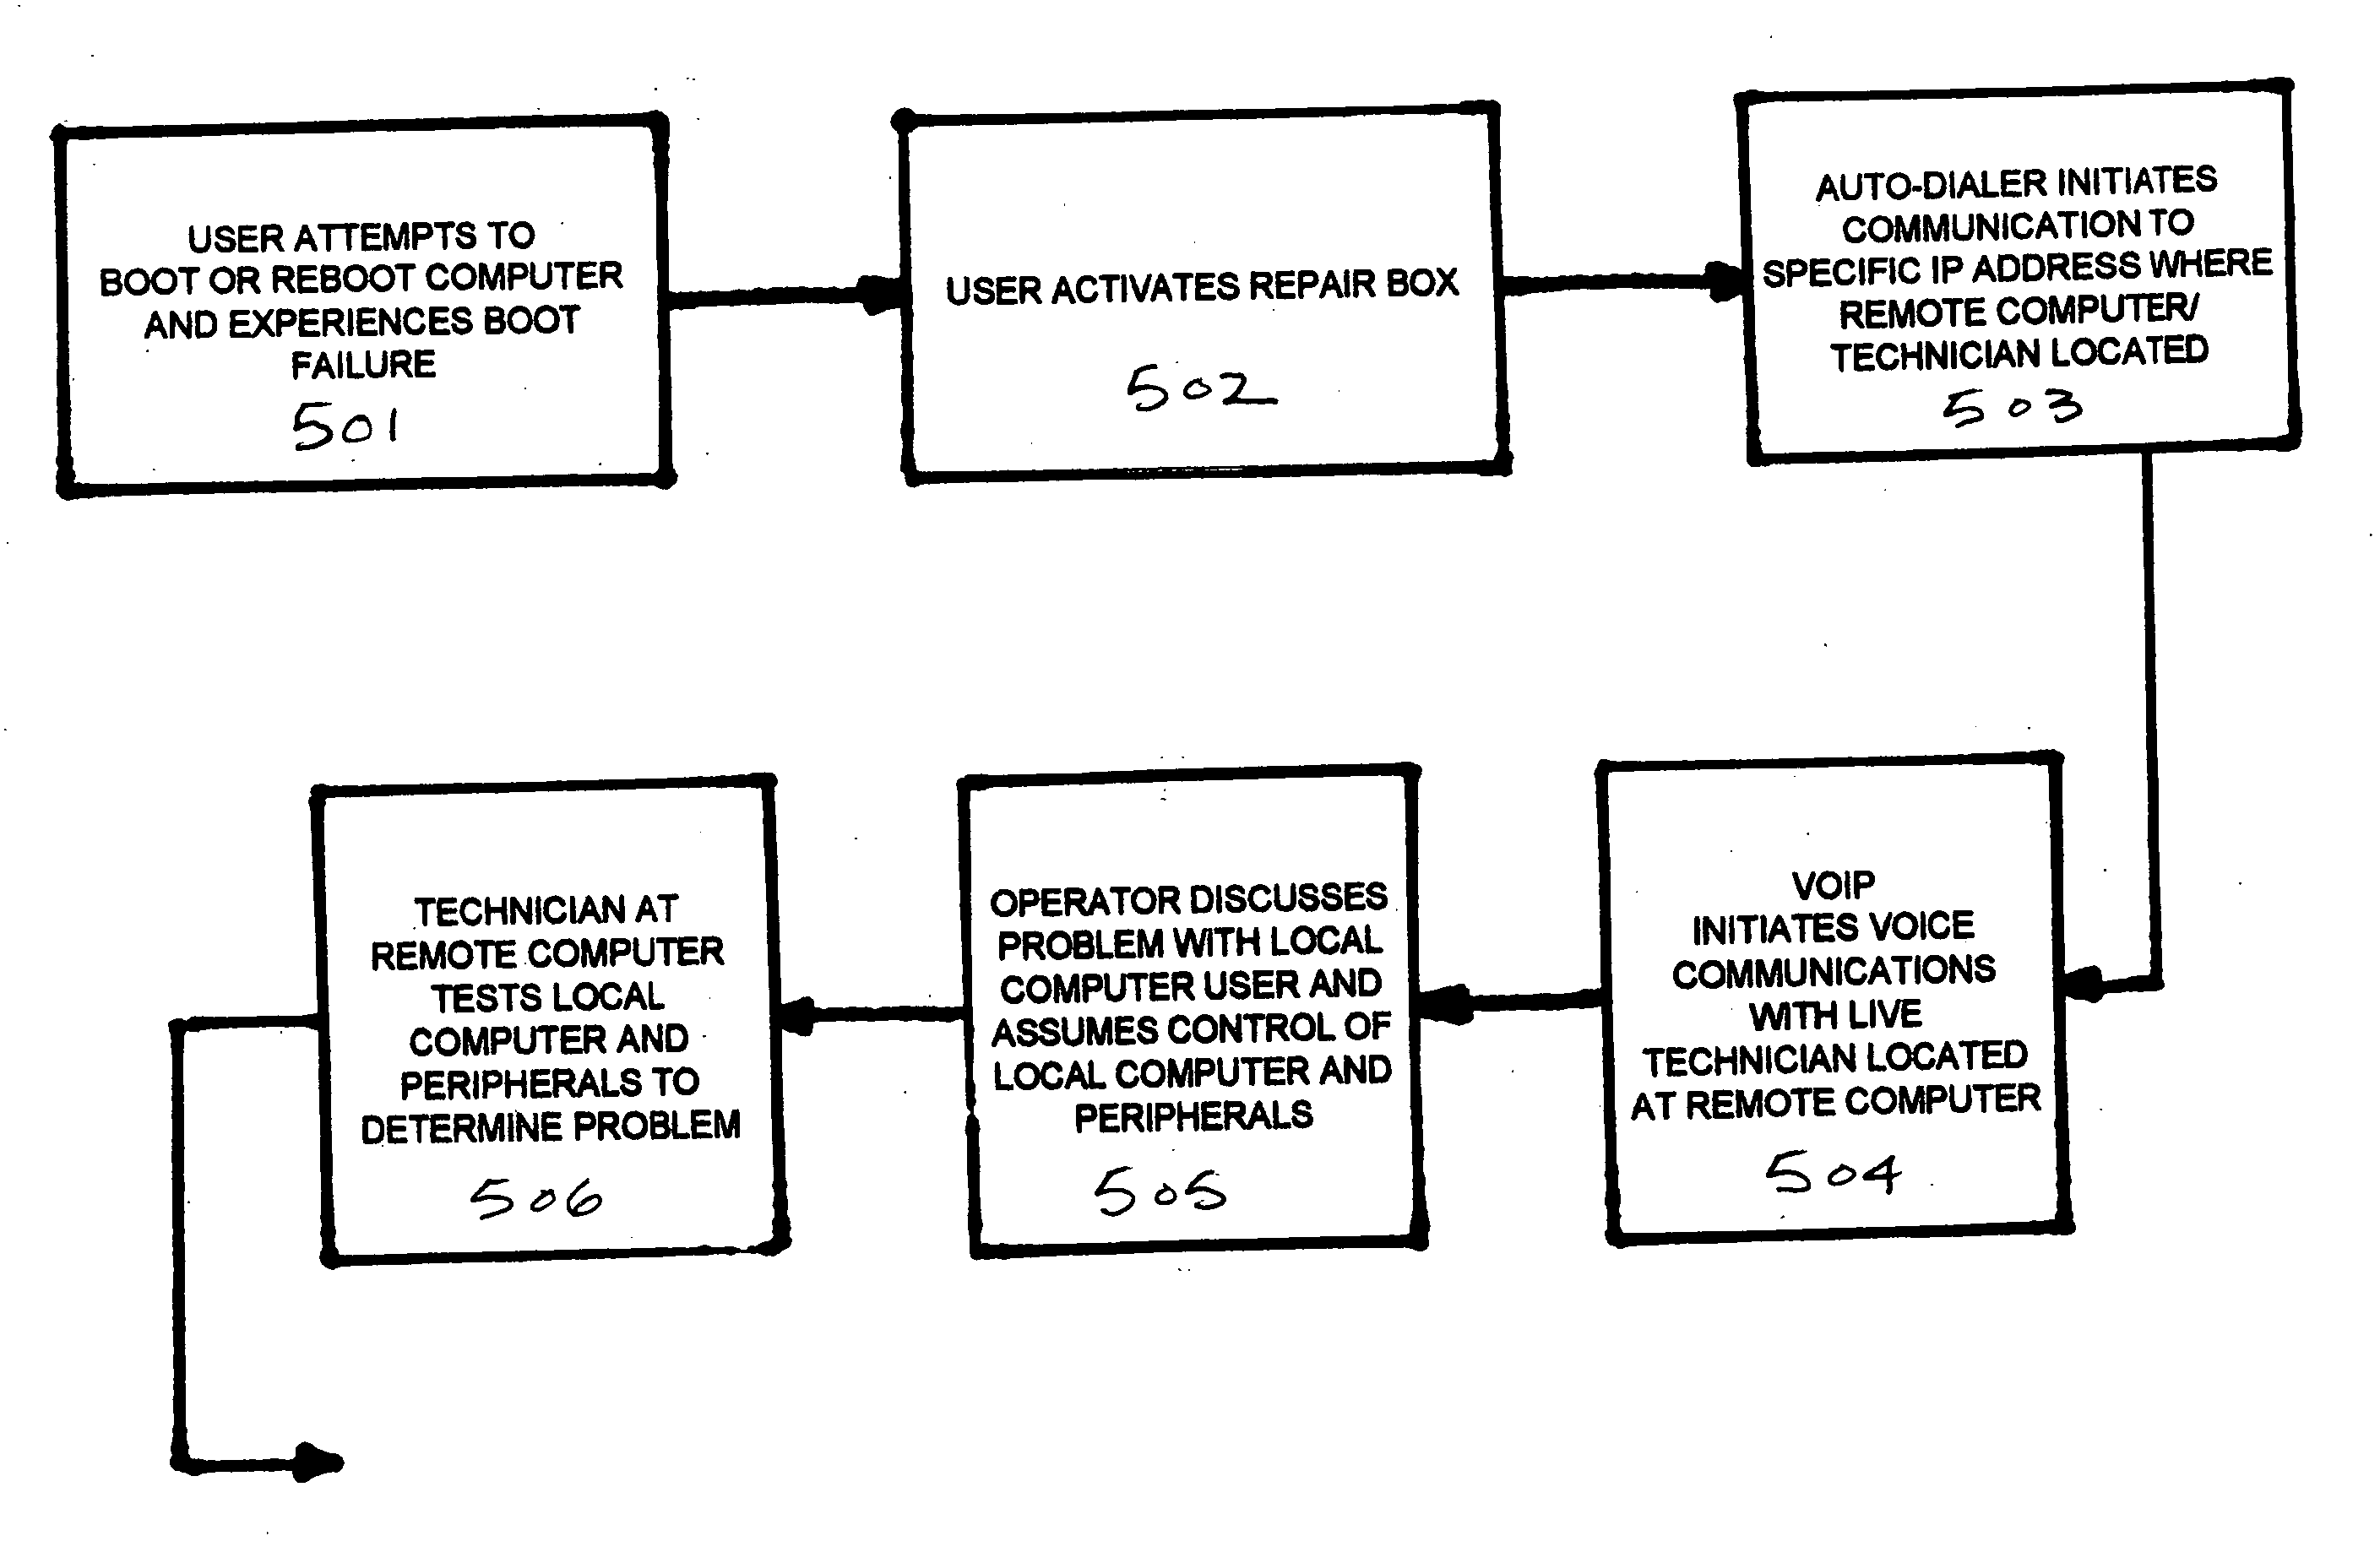 Maintenance device for remotely accessing and repairing failed computer systems